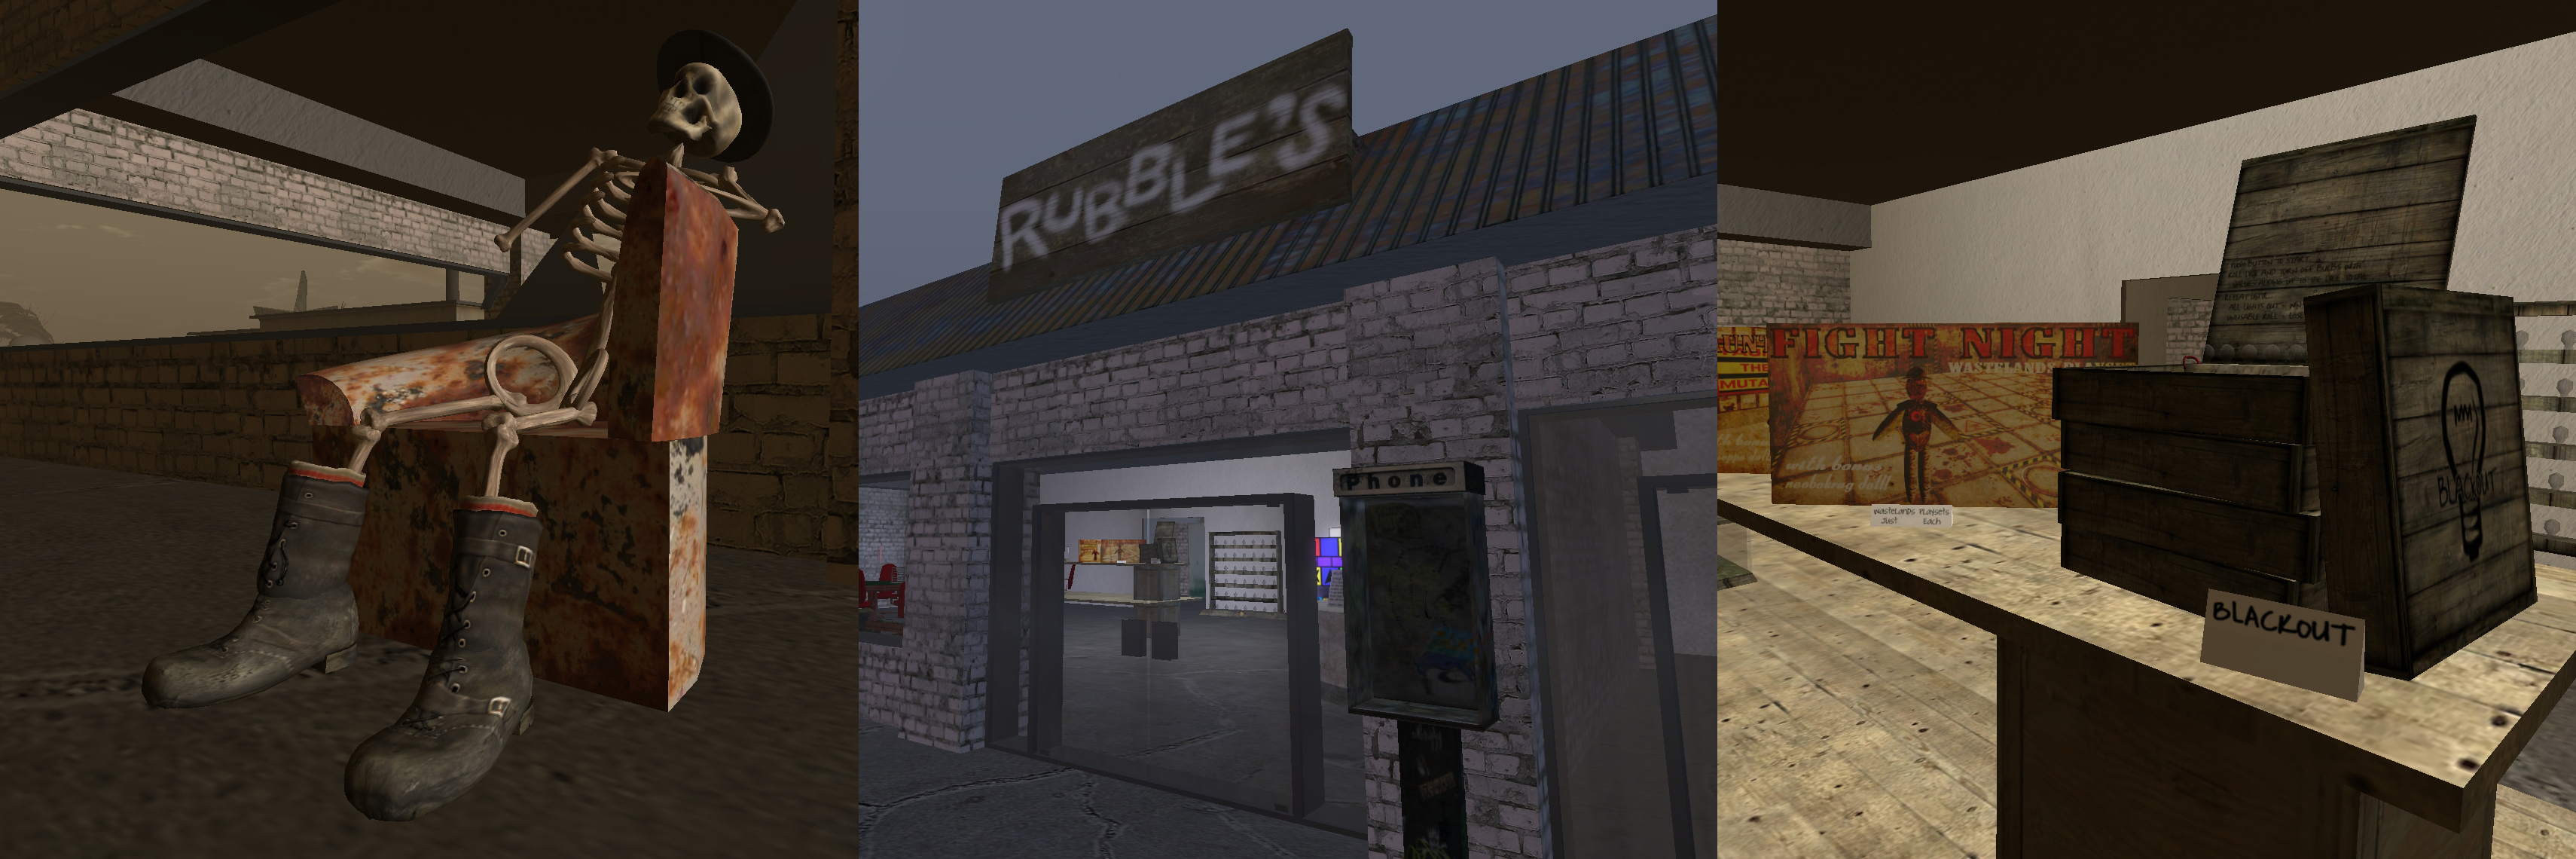 Rubbles: The curious games of Giuseppe and friends